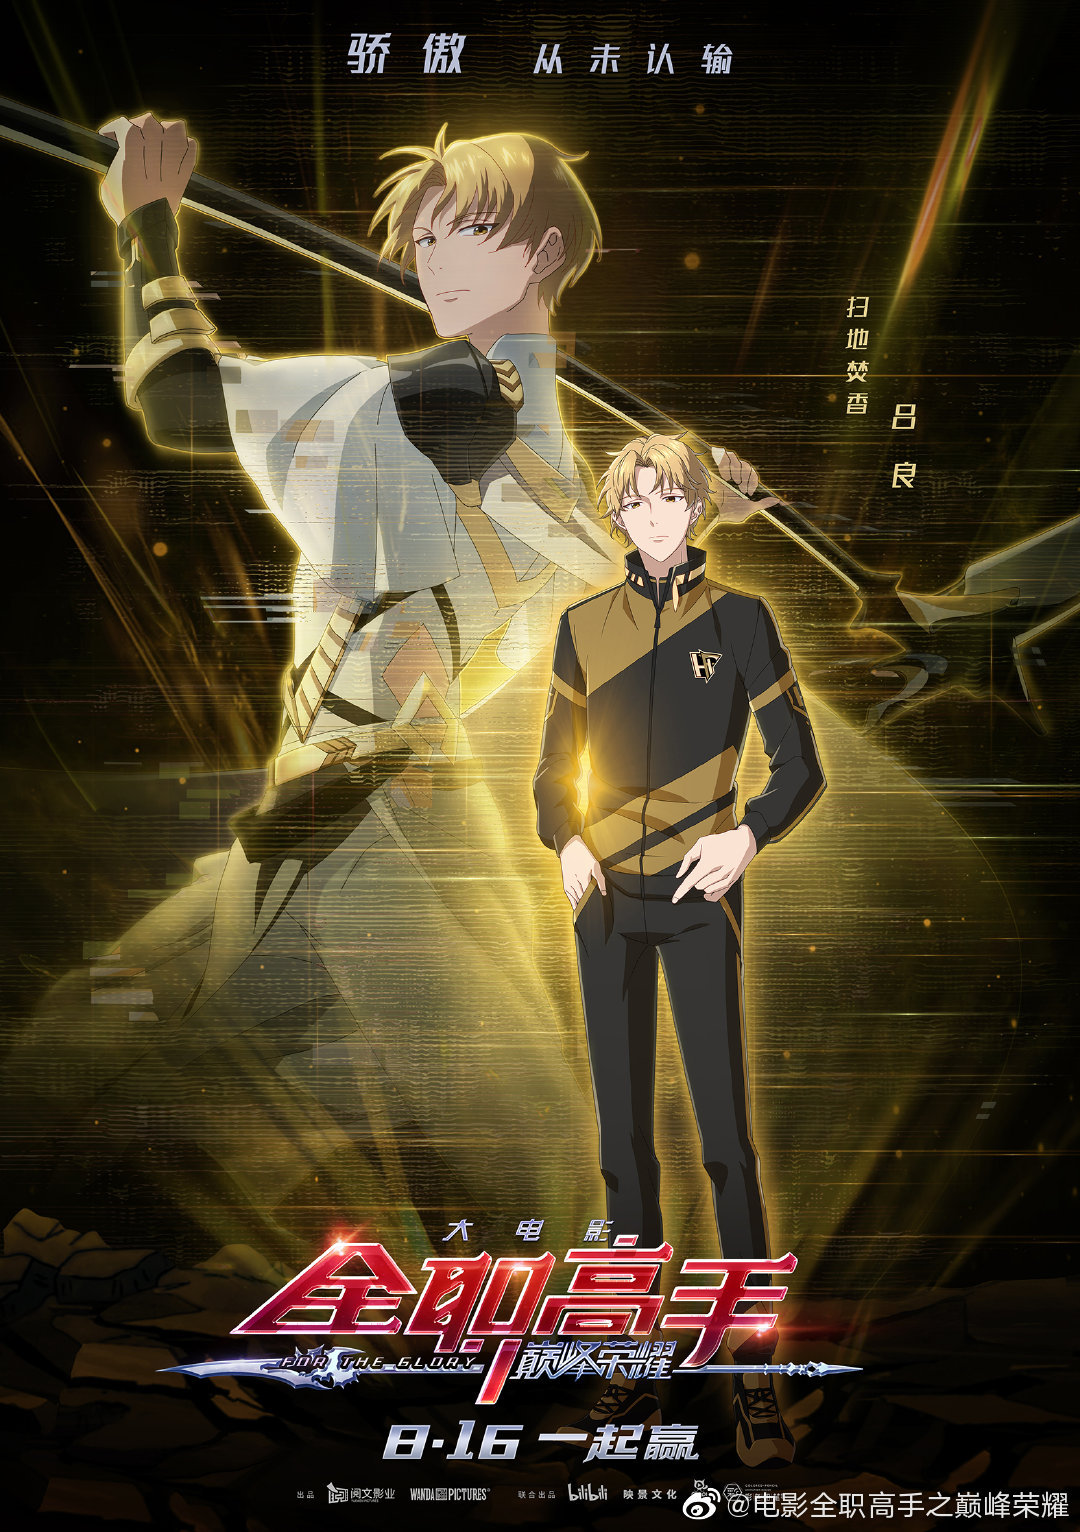 Characters appearing in Quanzhi Gaoshou Movie: For the Glory Anime